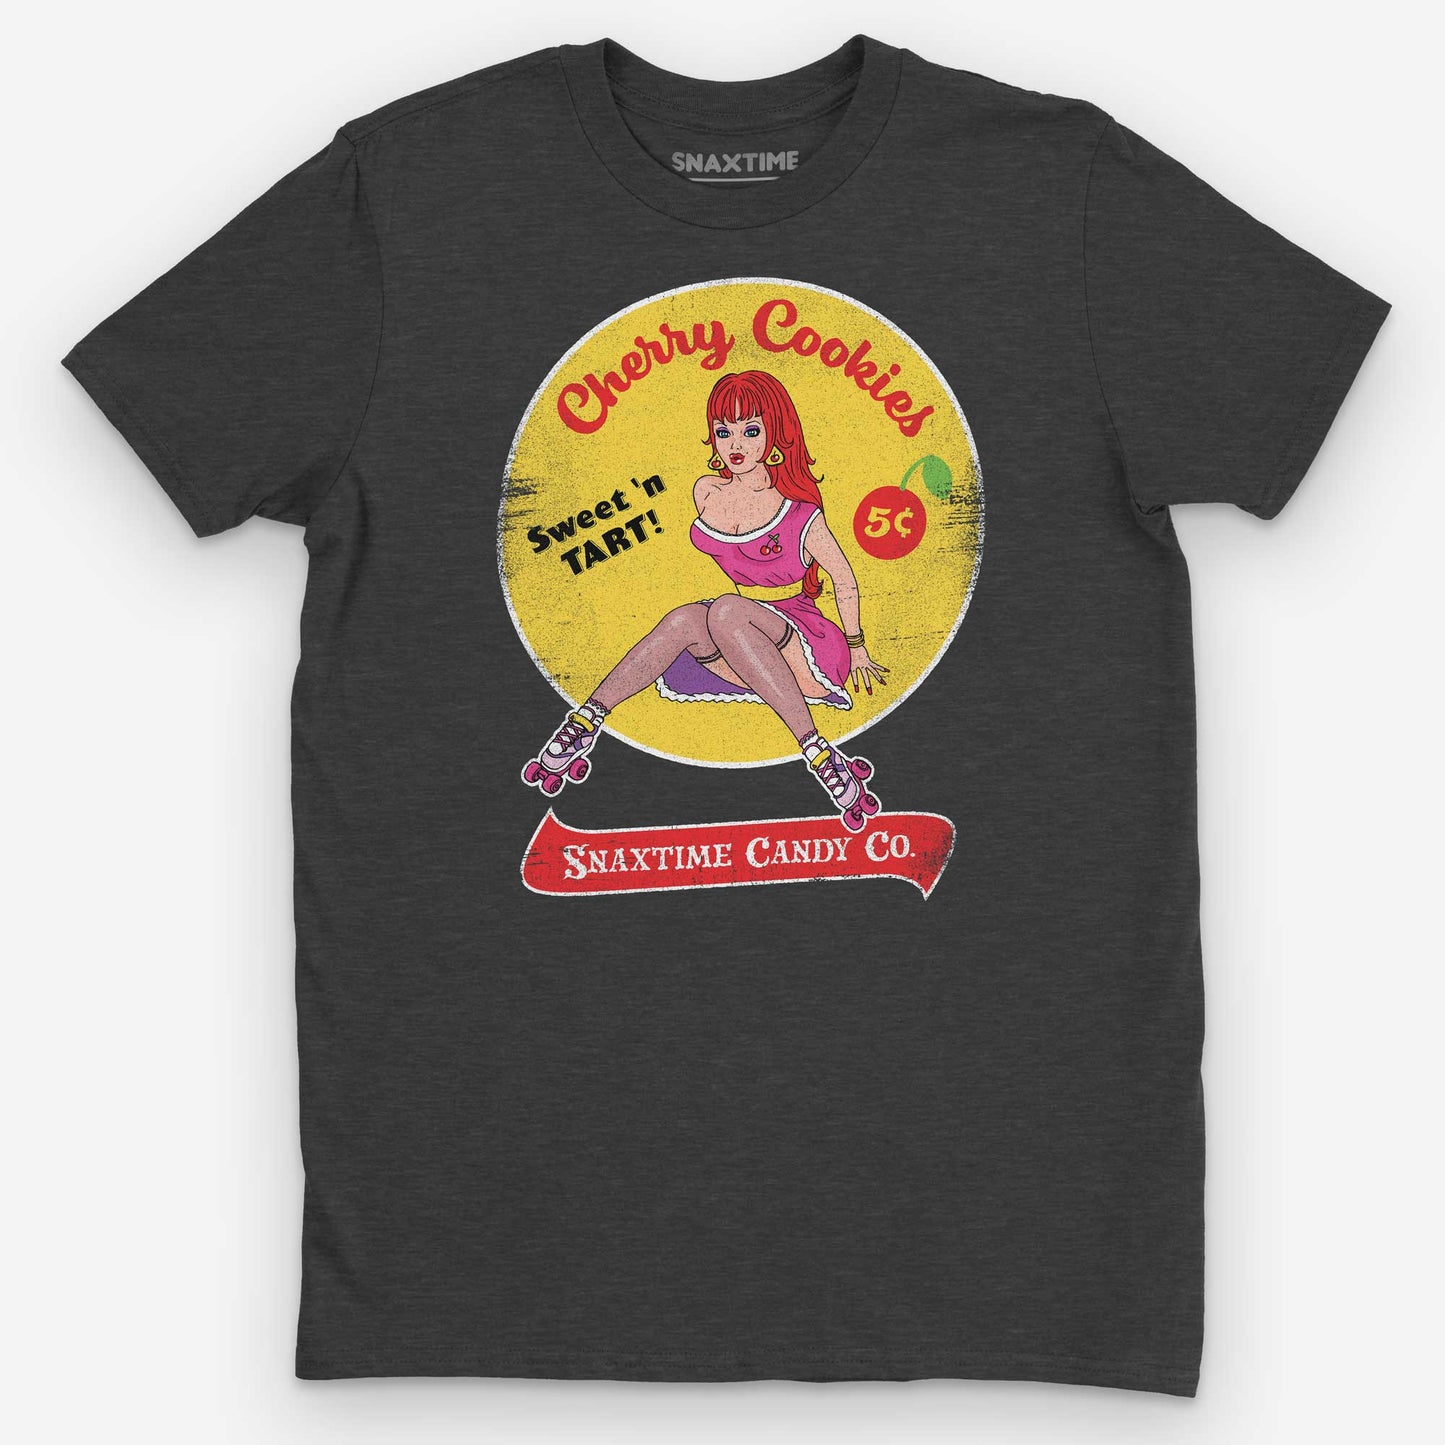 Heather Dark Grey Cherry Cookies Retro Comic Pinup Graphic T-Shirt by Snaxtime